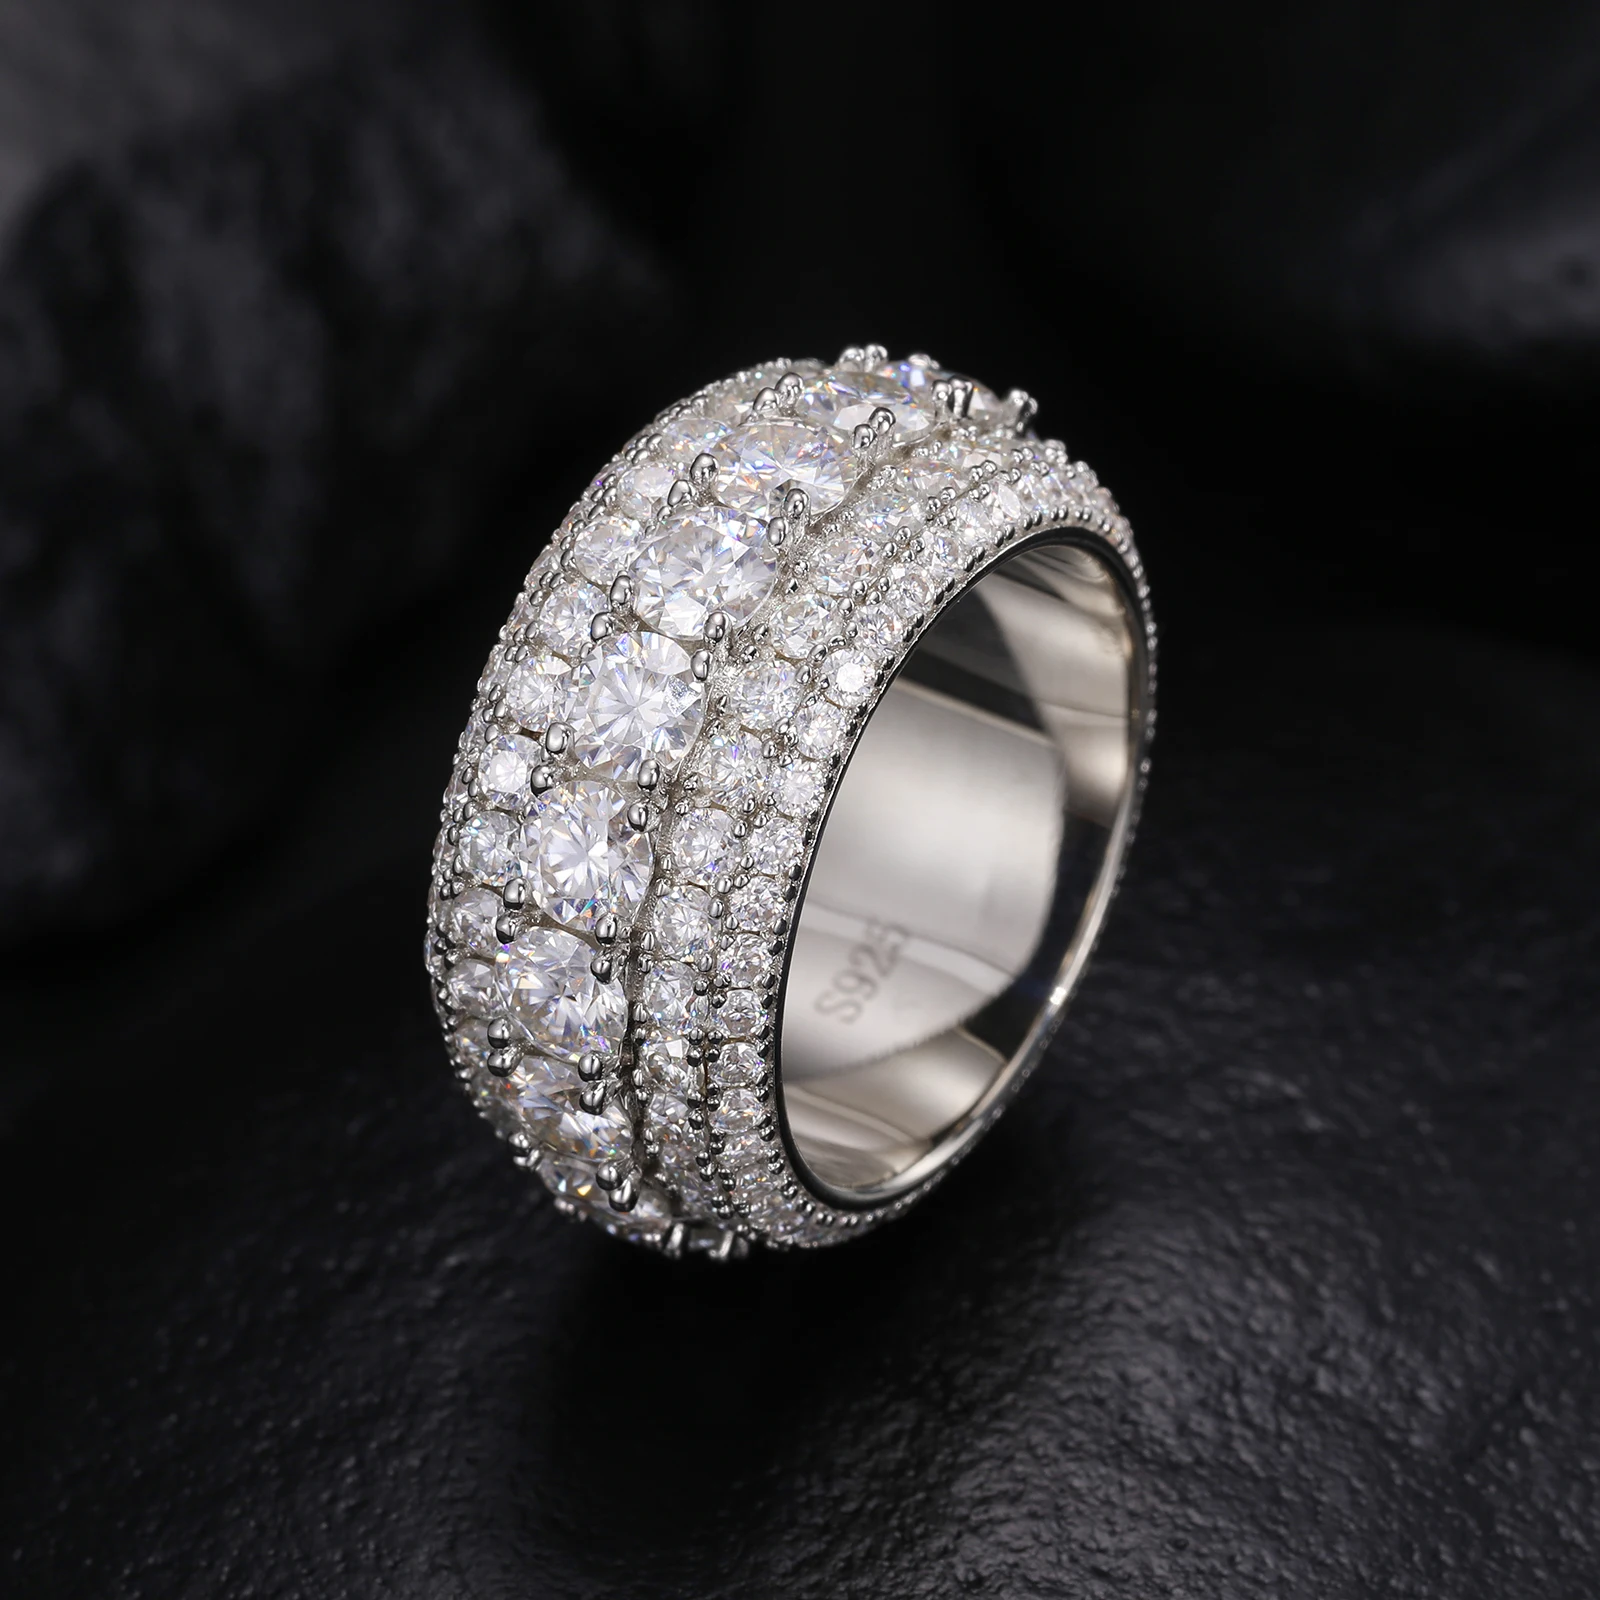 Luxury 5 Rows Moissanite Ring Pass Diamond Tester 925 Sterling Silver Shiny Fashion Jewelry Rings Moissanite Ring Men